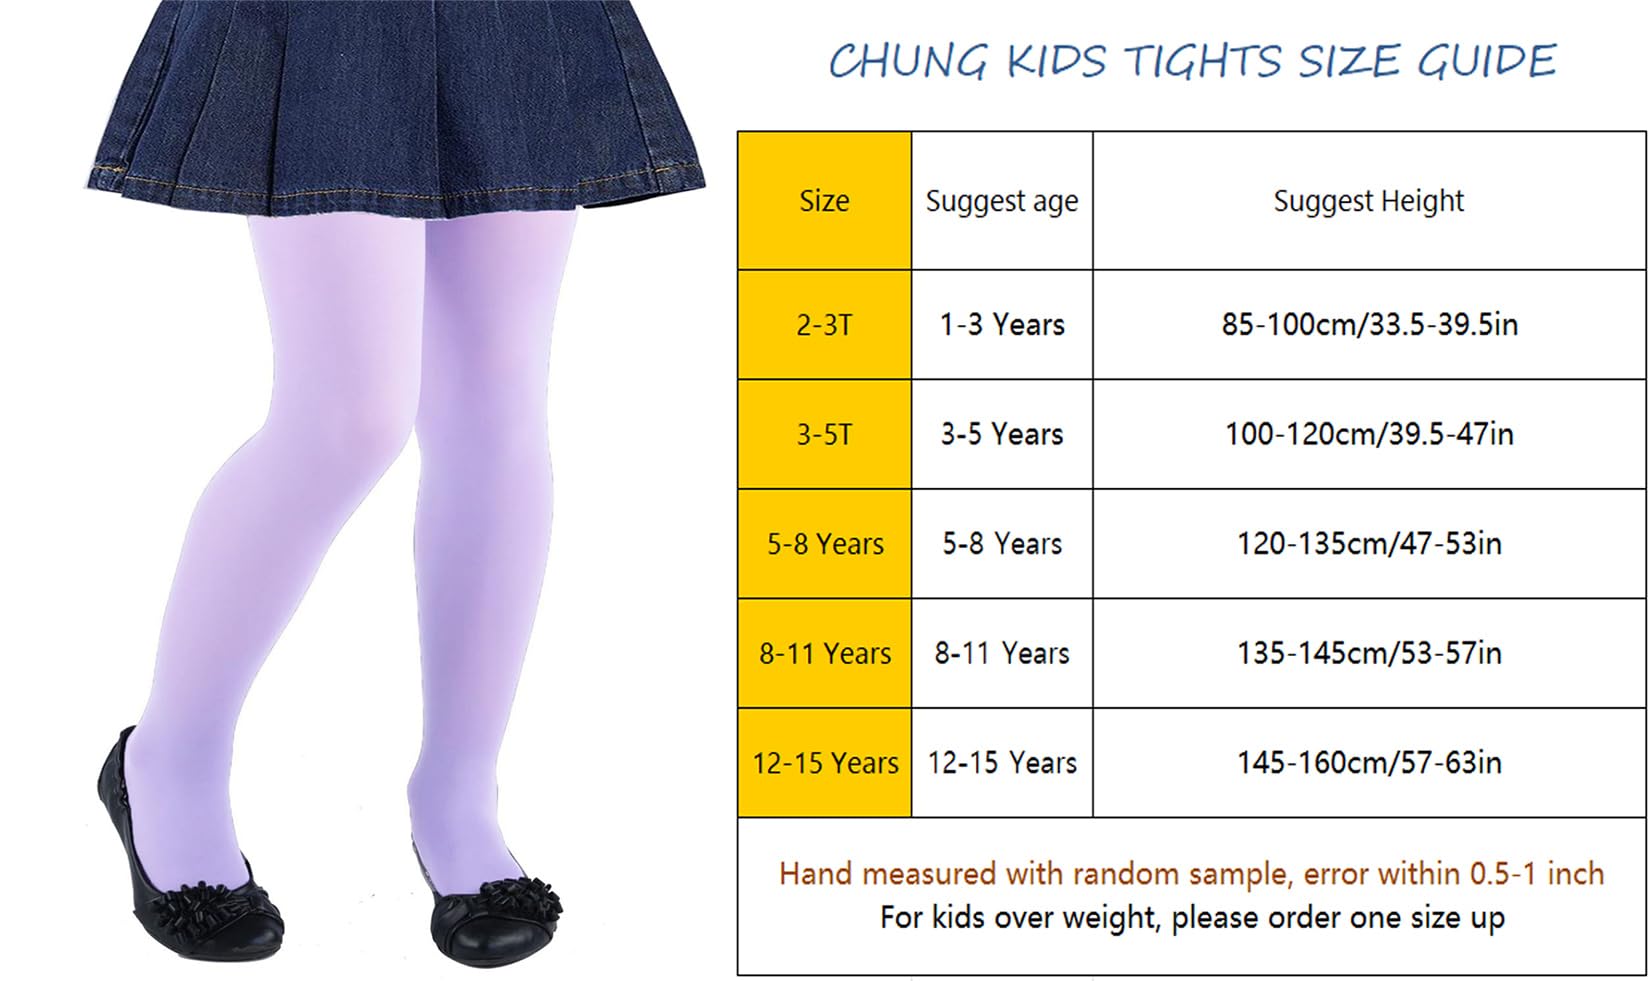 CHUNG Girls Light Weight Stretchy Footed Lights Students Ballet 1or3 pieces, Green, 5-8Y